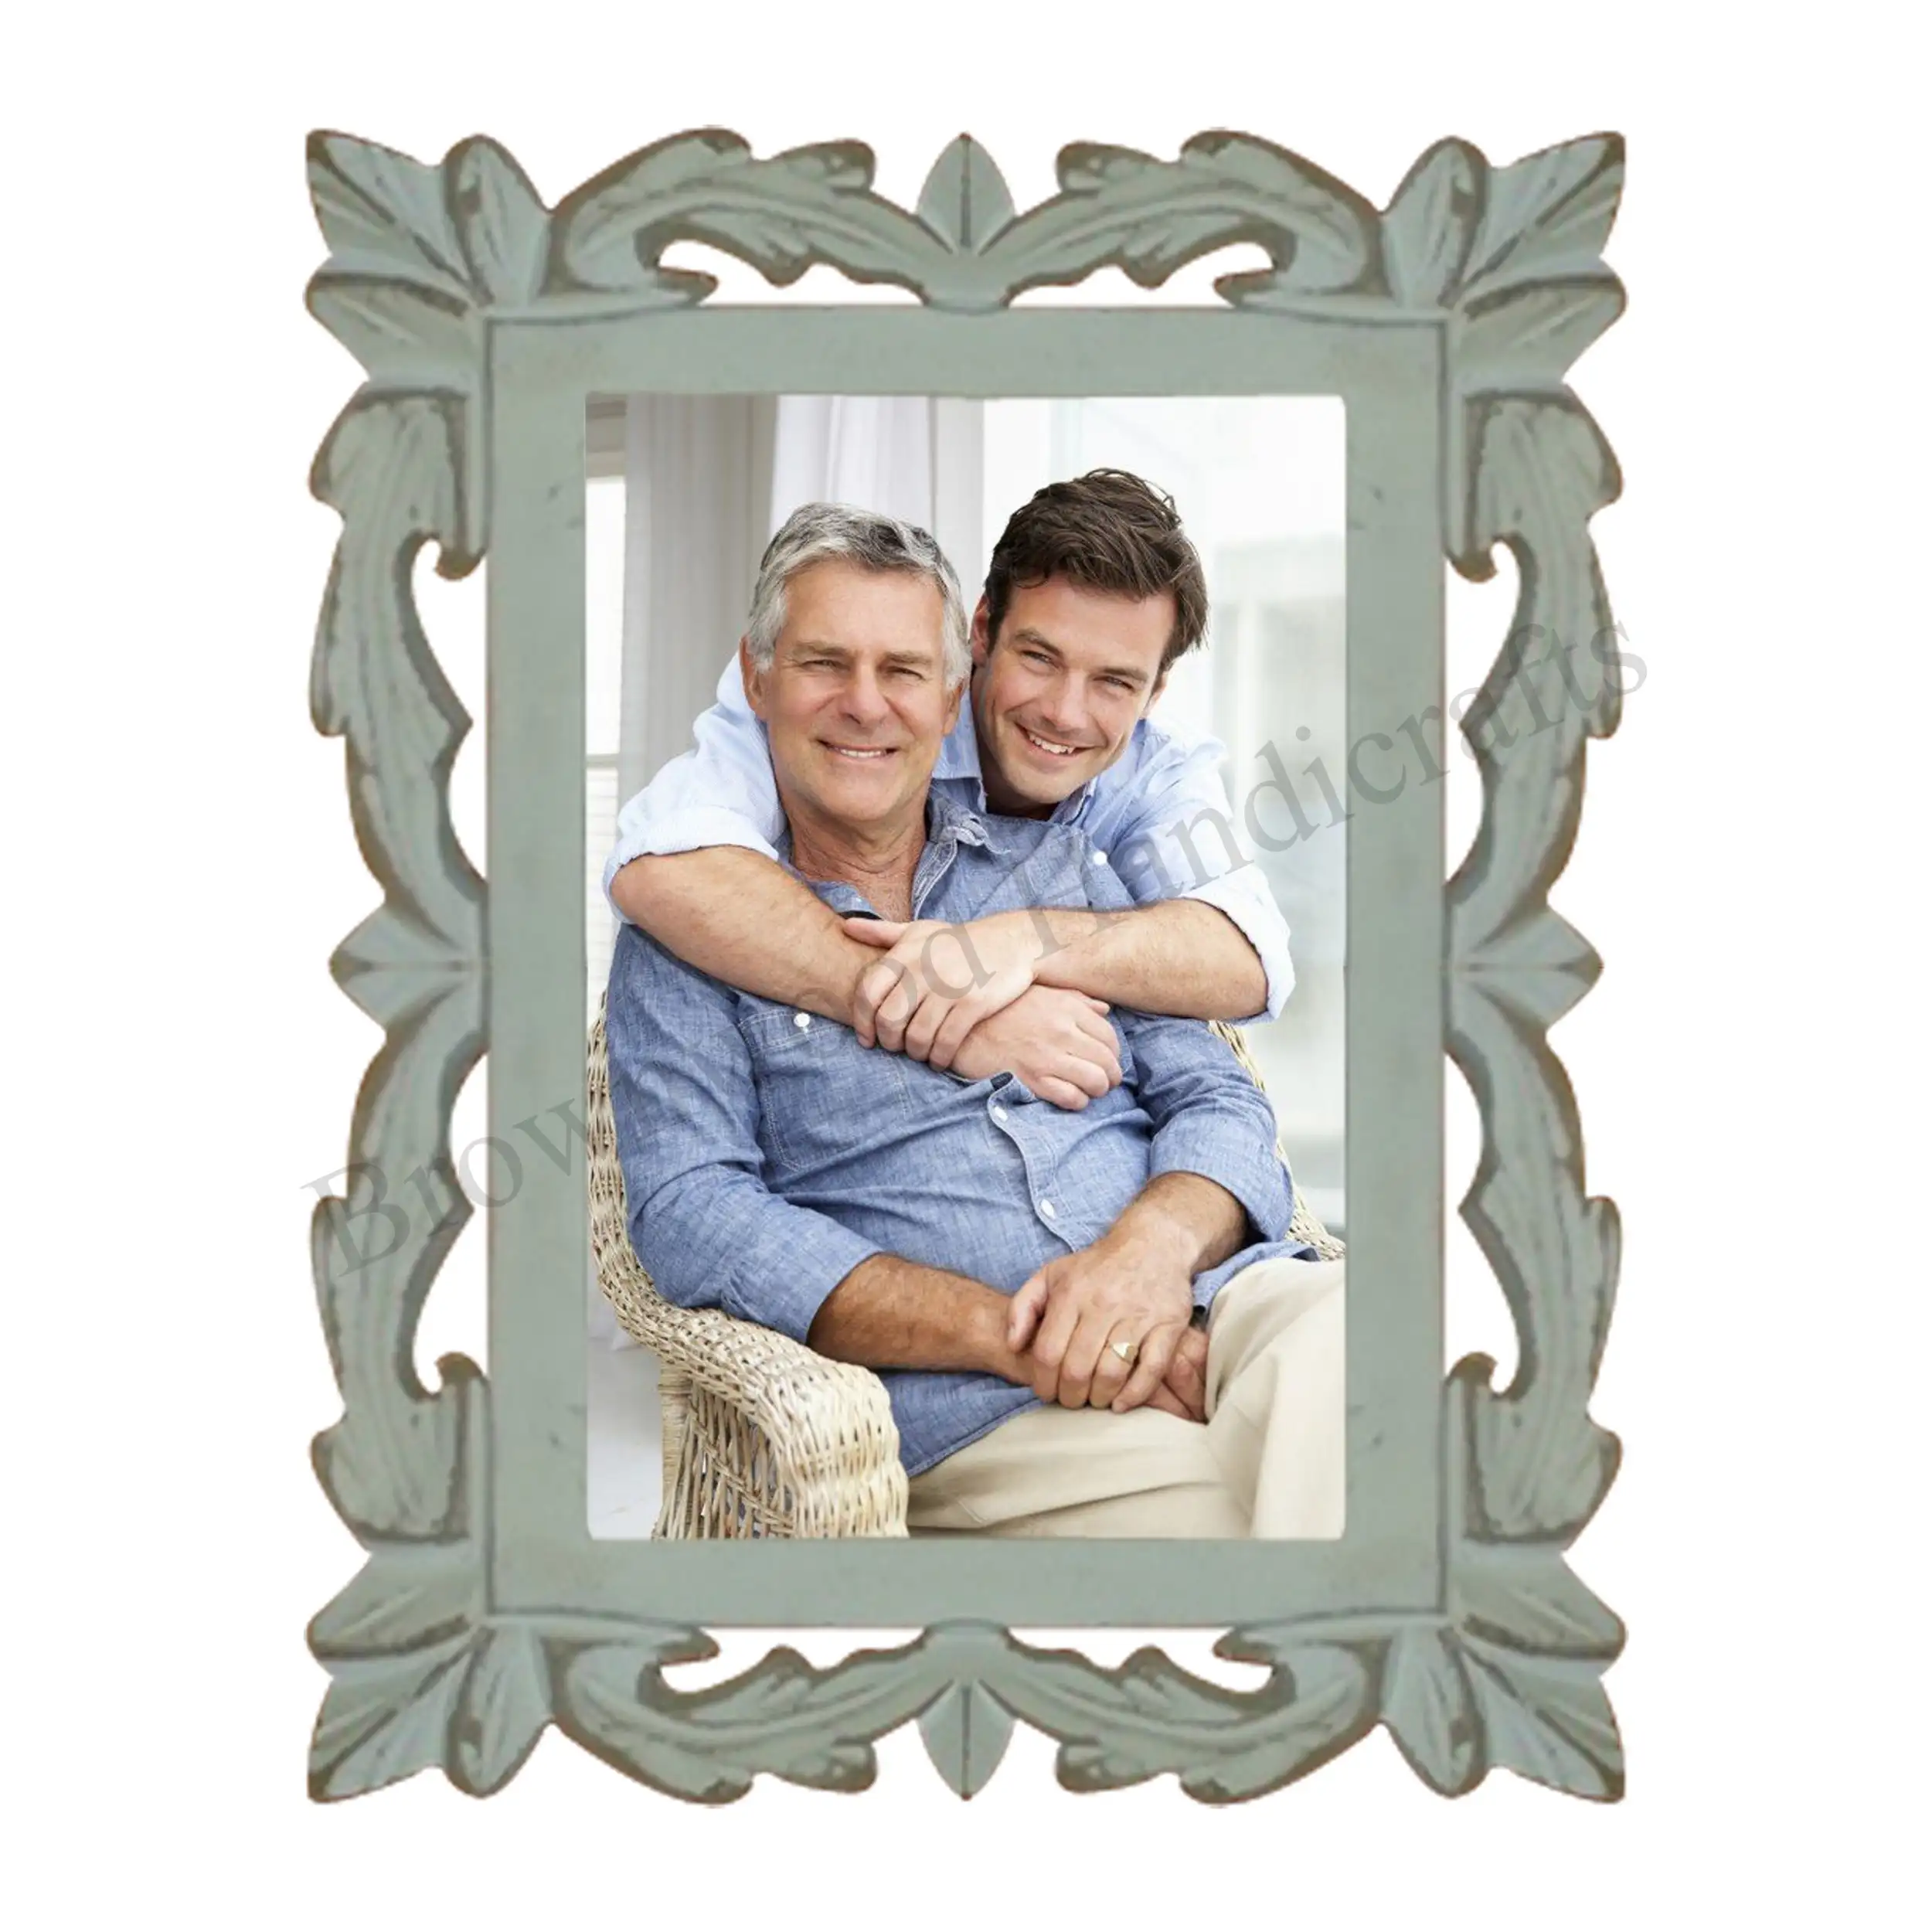 Wooden Carved Antique Poster Picture Photo Frame Wall Hanging Photo Frame in wholesale Price from India.